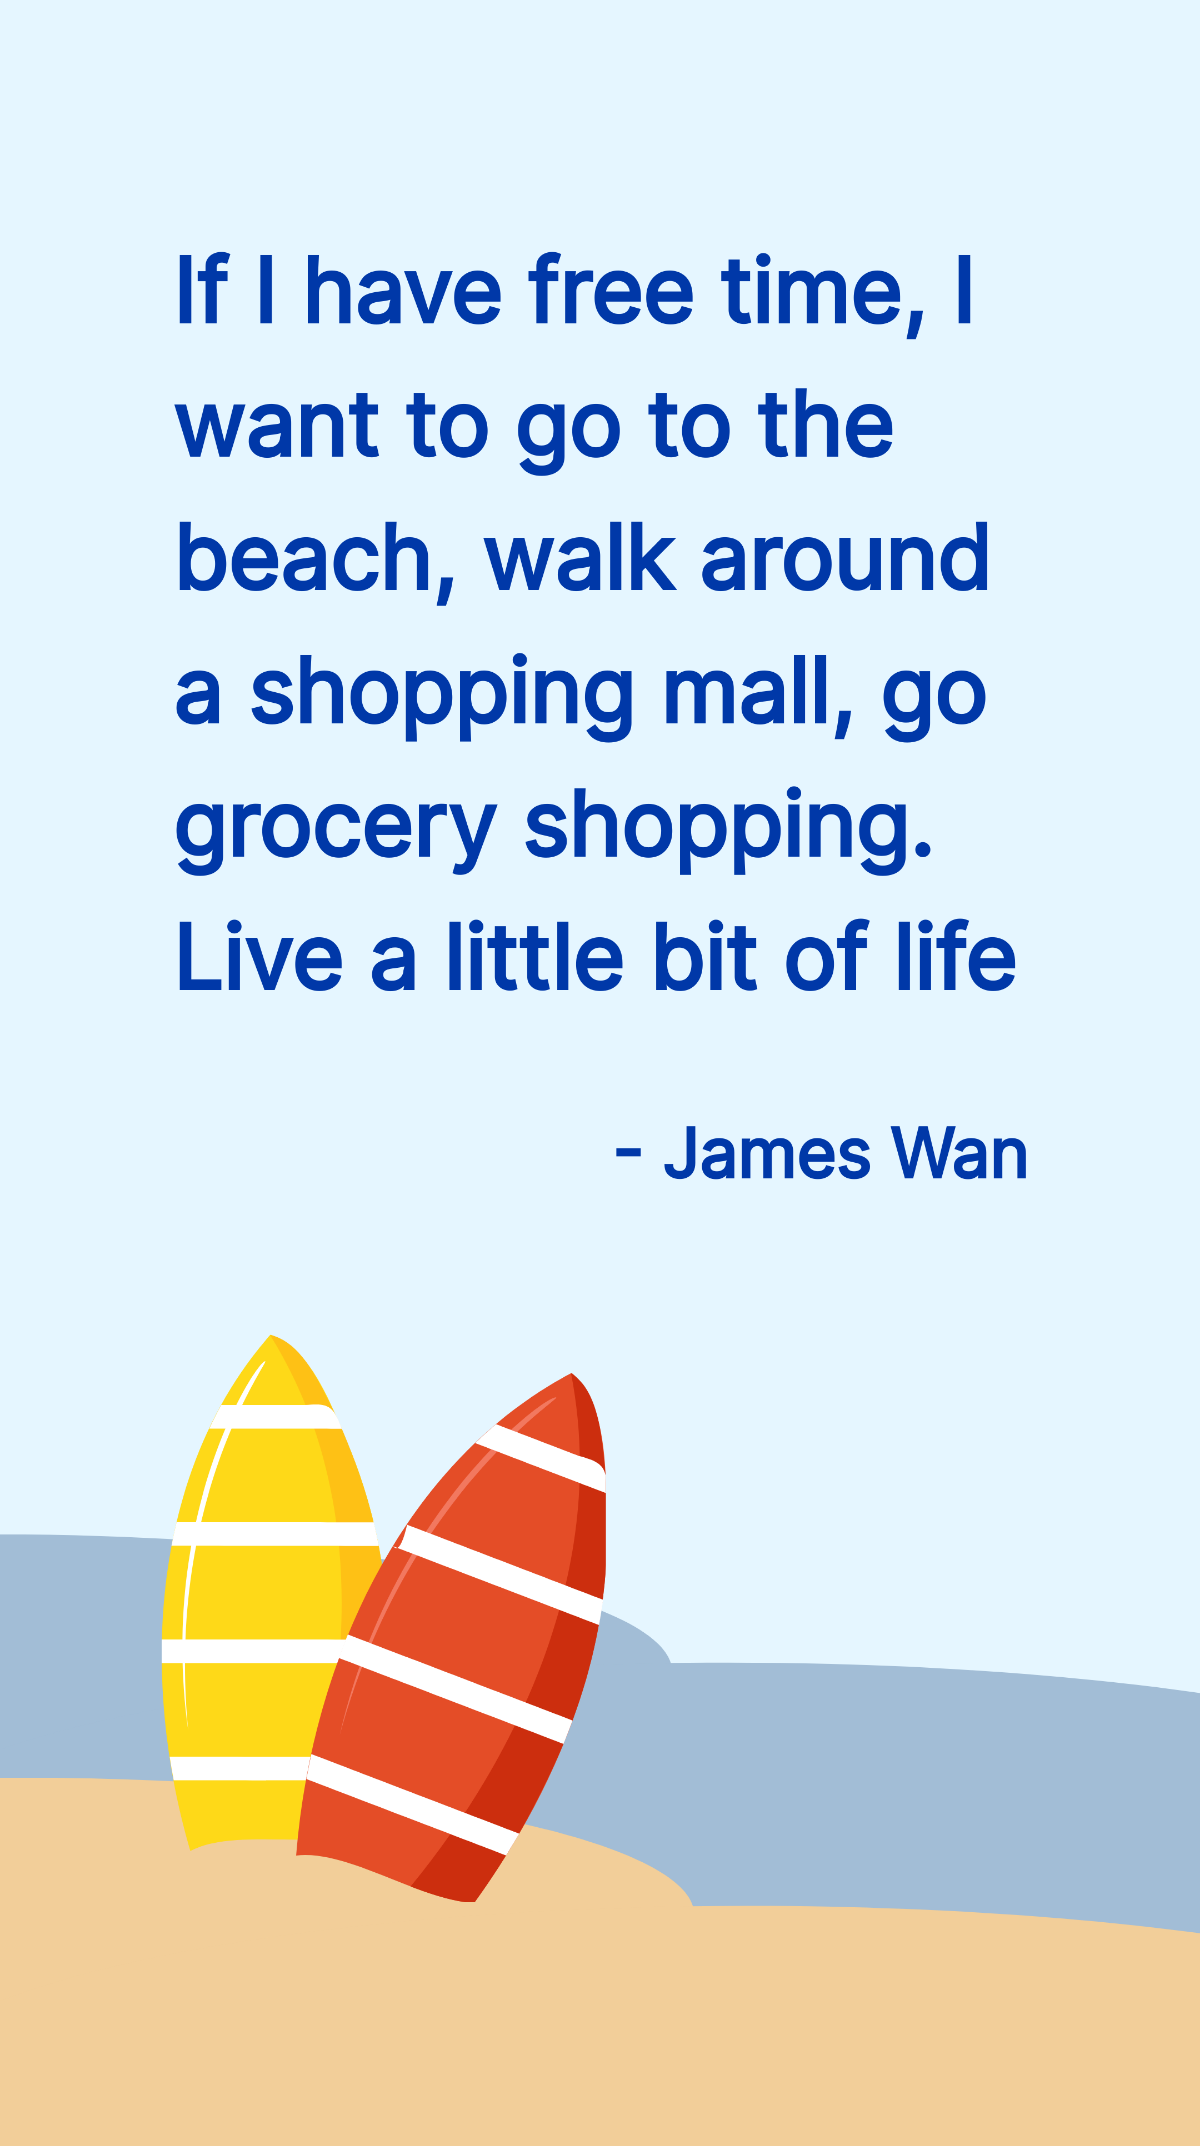 James Wan - If I have time, I want to go to the beach, walk around a shopping mall, go grocery shopping. Live a little bit of life